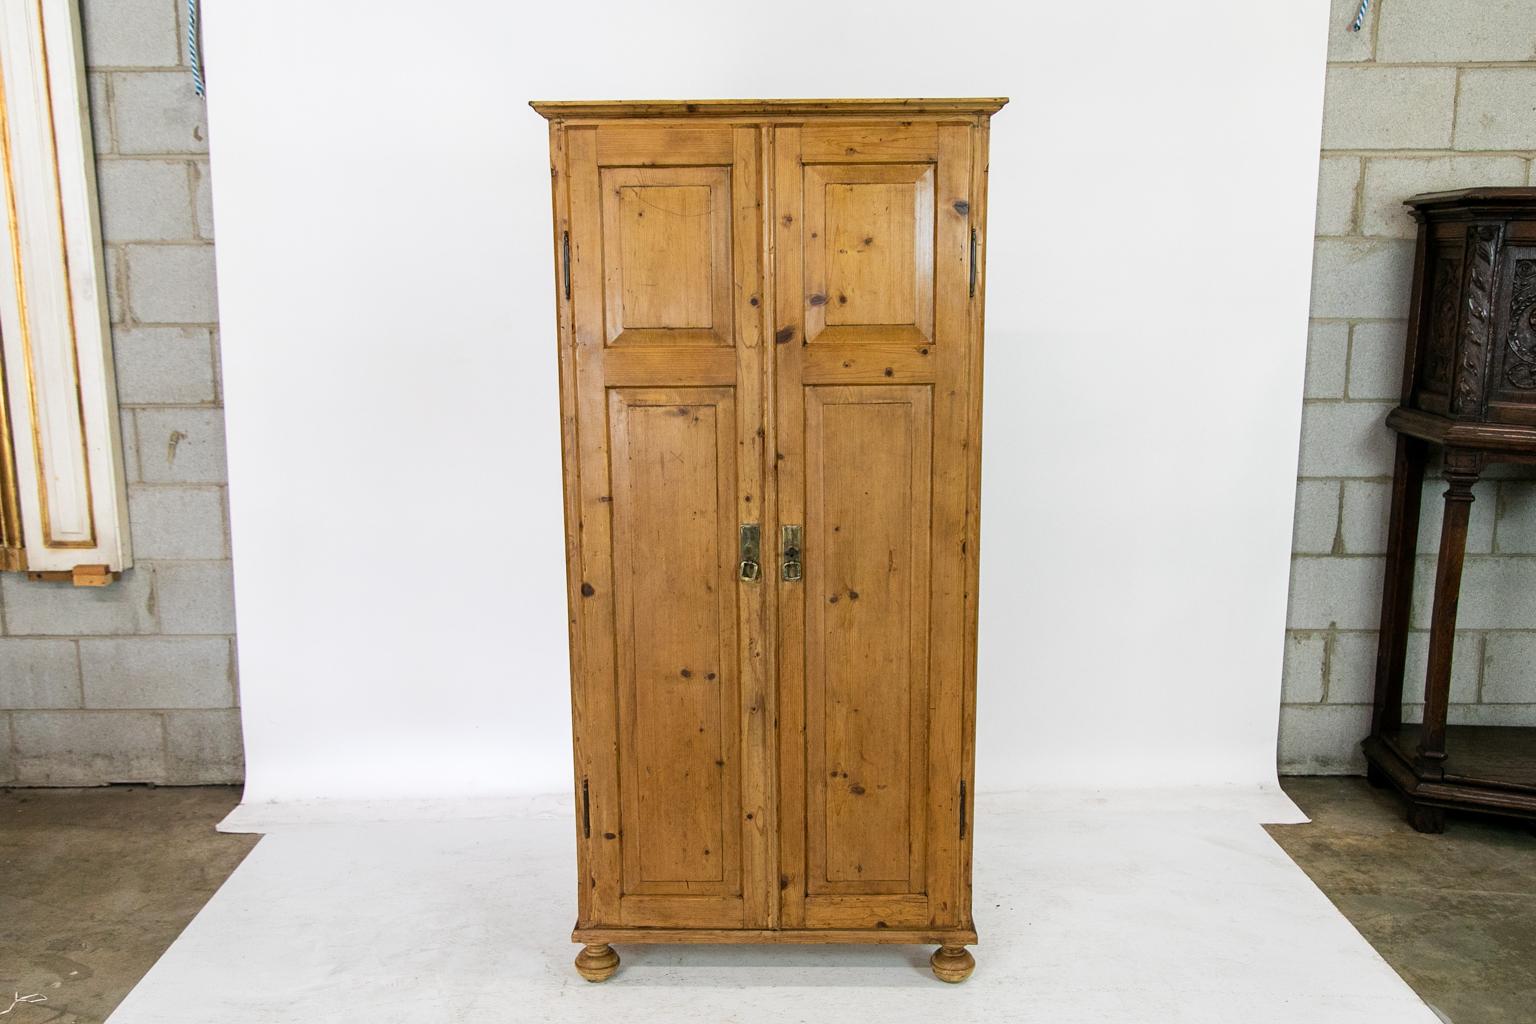 This French storage cupboard has two raised panels on each door with a shaped wooden astragal on the right hand door. The interior is fitted with twenty-seven drawers with the original steel bin pulls. The left hand door has the original steel